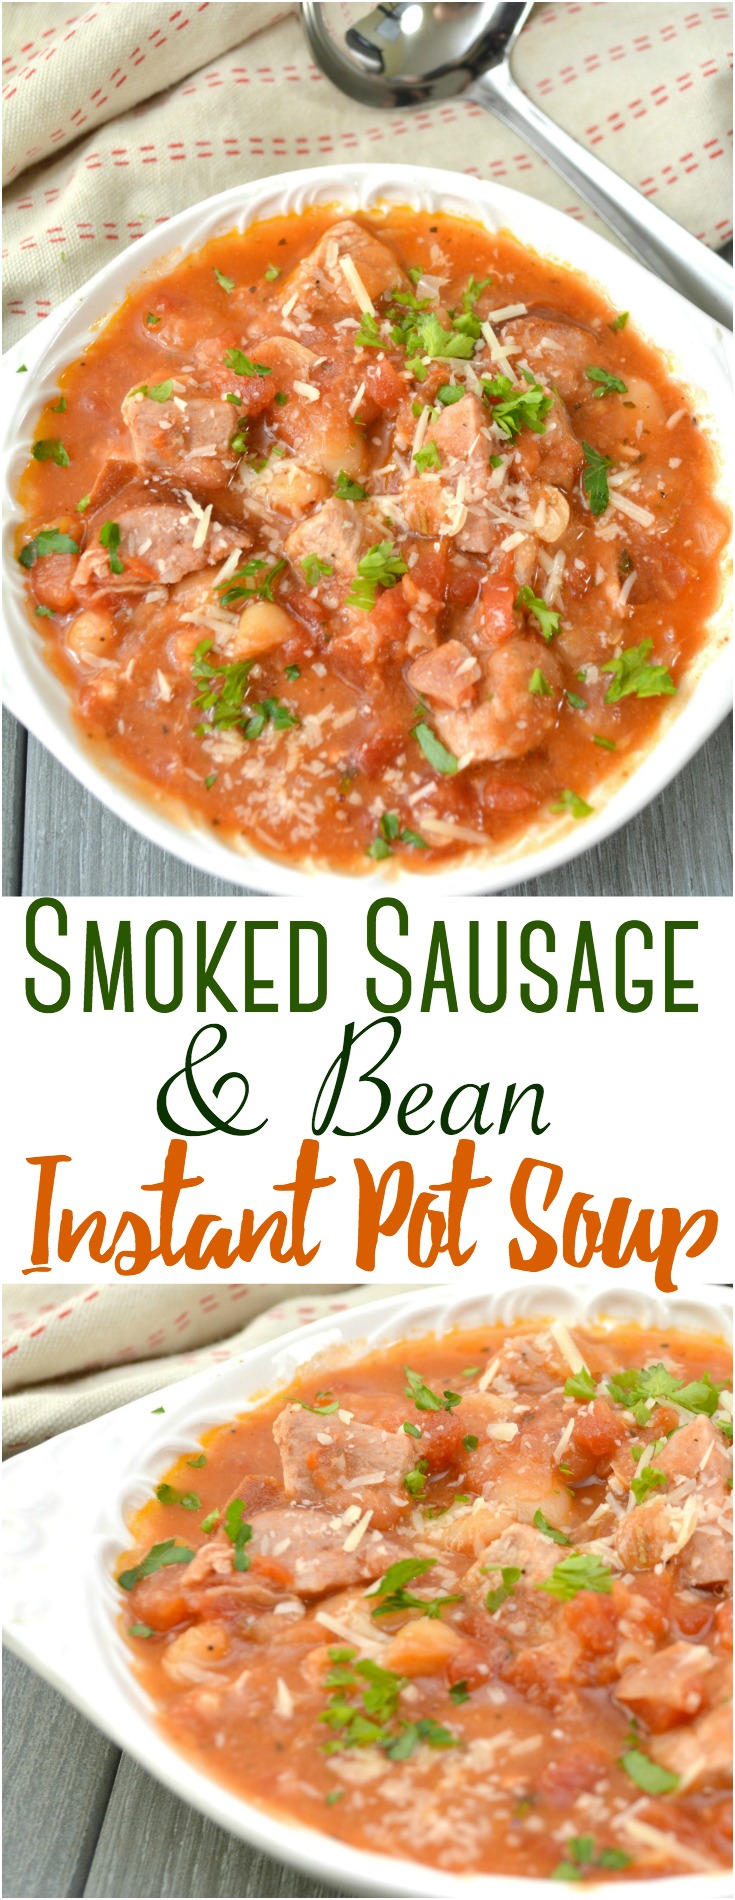 This easy yet hearty Pork, Smoked Sausage and Bean Instant Pot soup comes together quickly and easily for busy weeknights! 